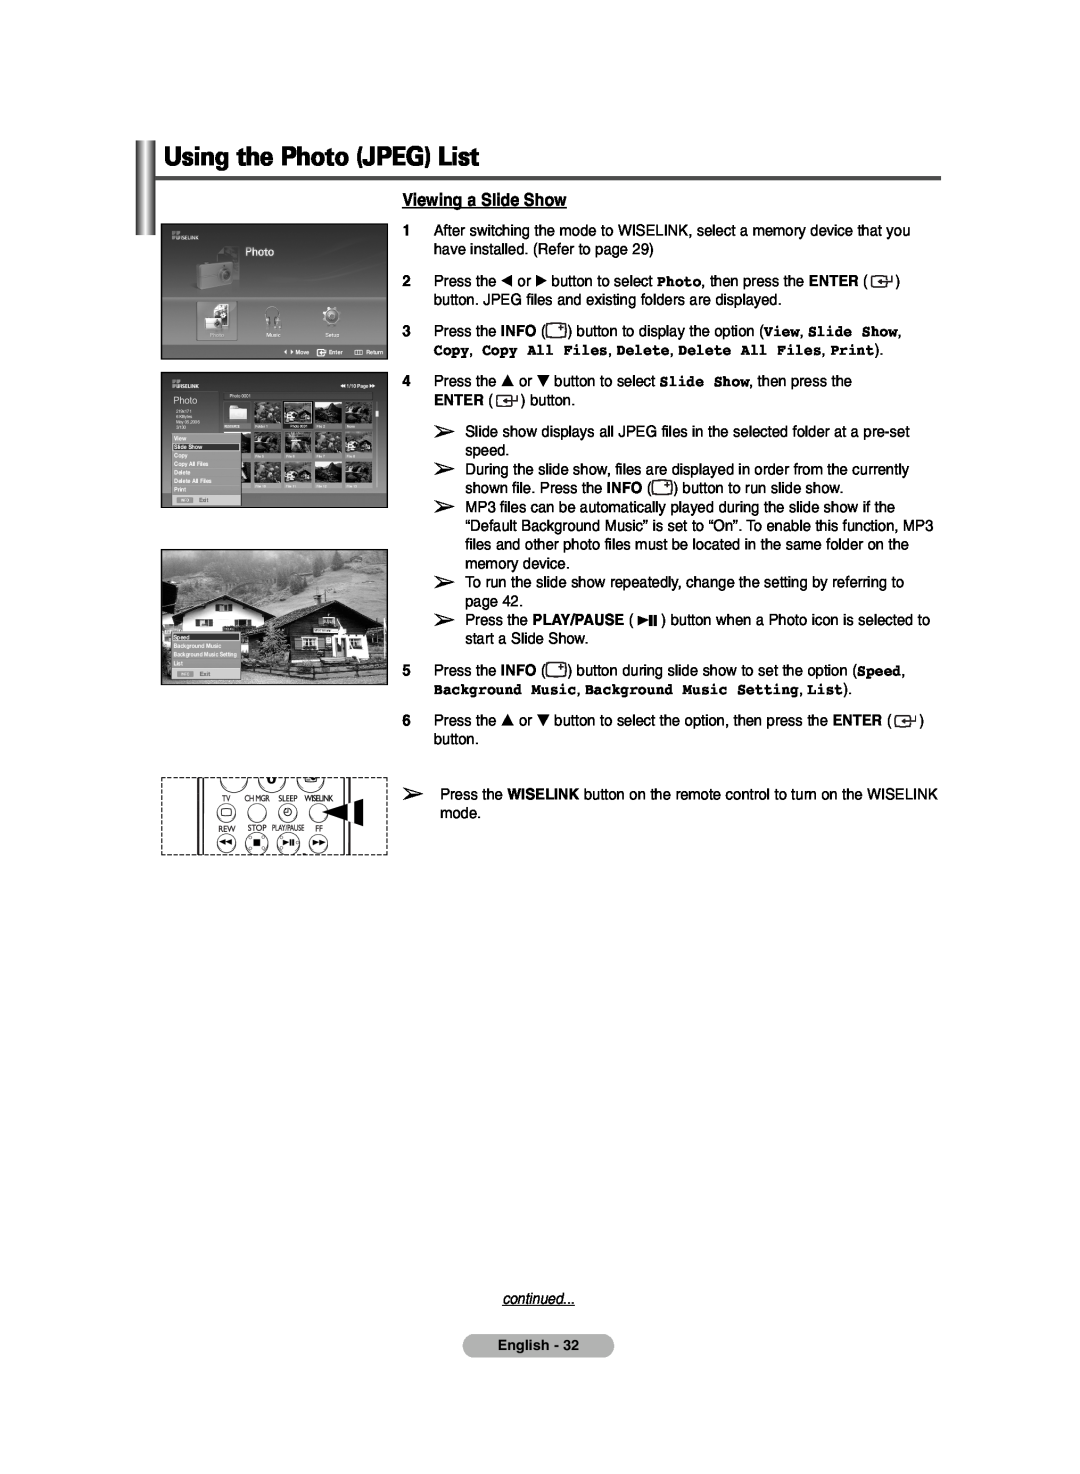 Samsung PDP-TELEVISION manual Viewing a Slide Show, Copy, Copy All Files, Delete, Delete All Files, Print, continued 